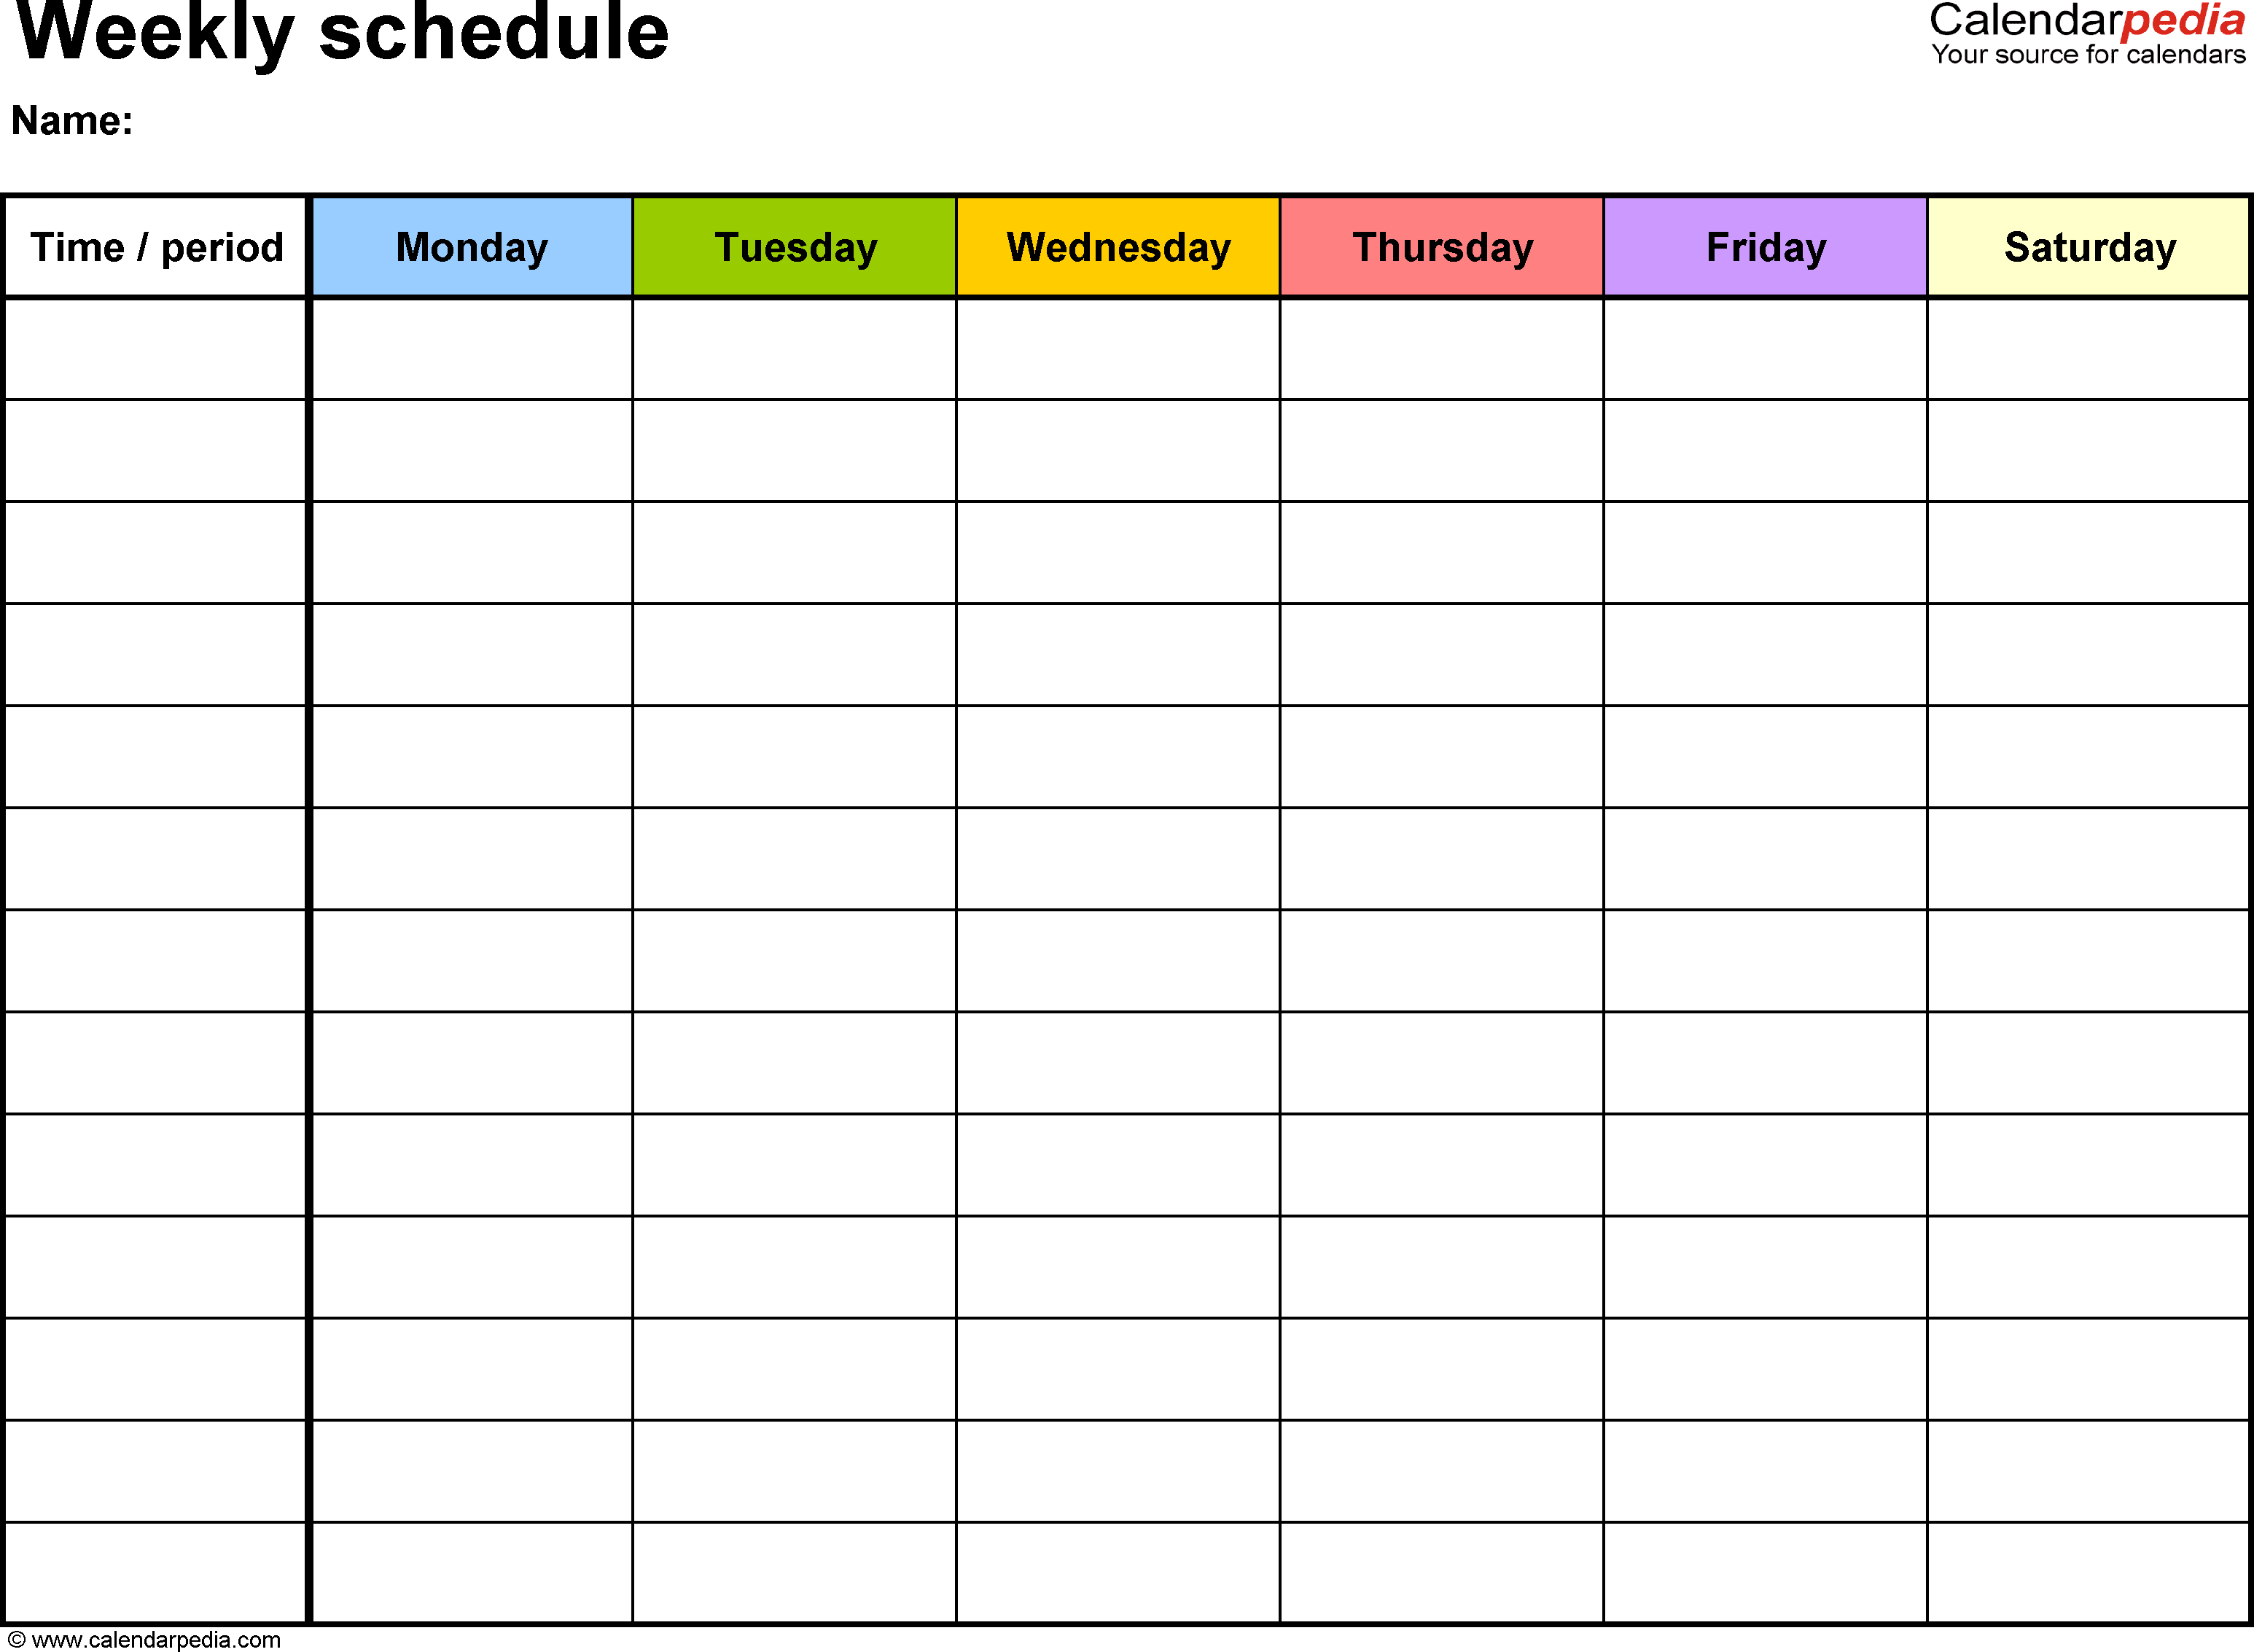 Free Weekly Schedule Templates For Word  18 Templates with regard to 5 Day Weekly Planner Template